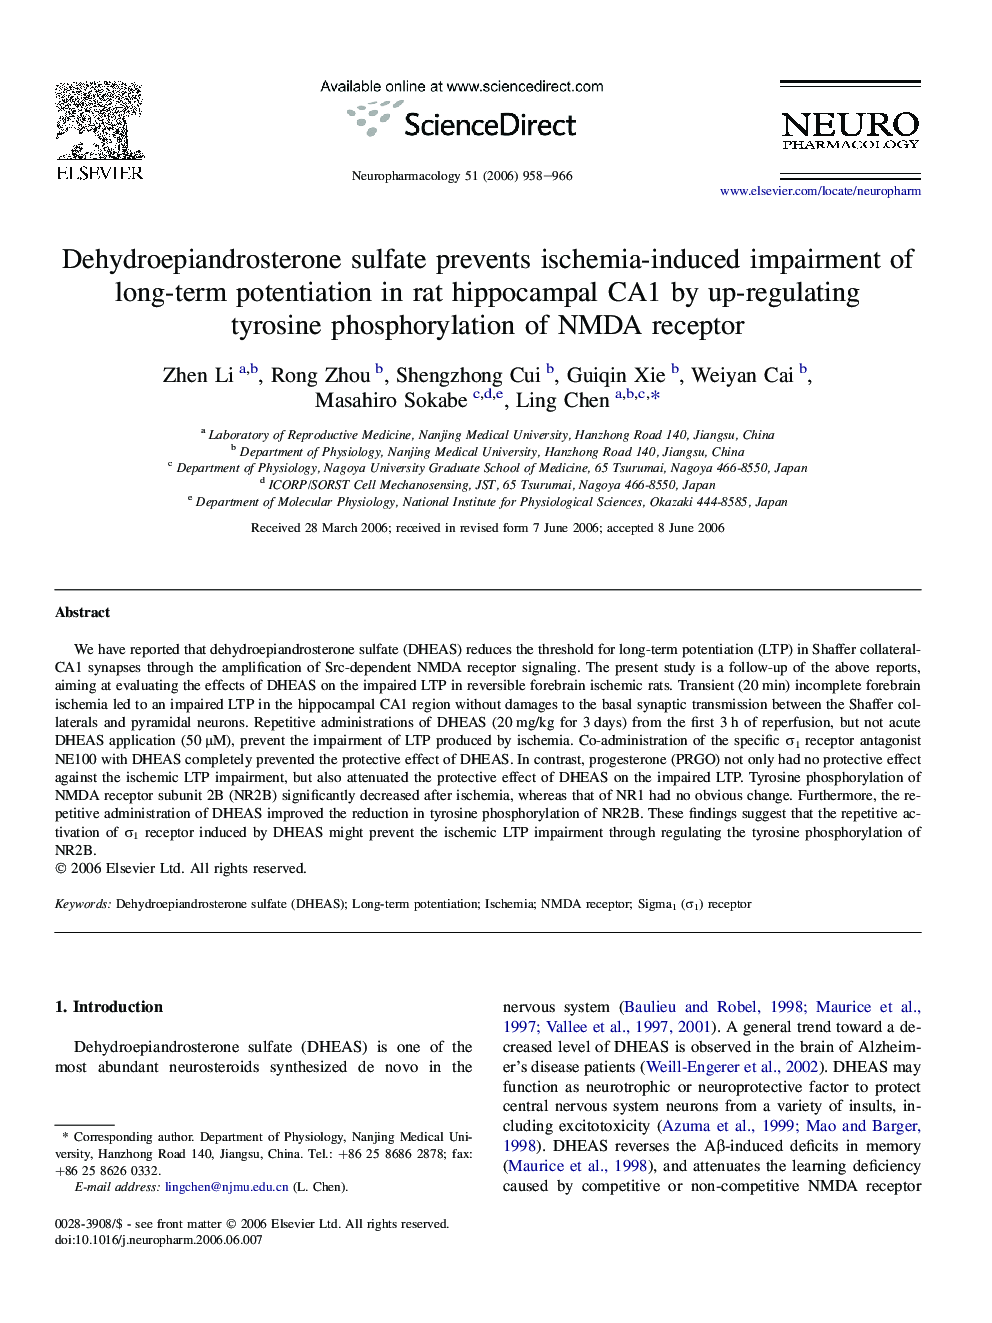 Dehydroepiandrosterone sulfate prevents ischemia-induced impairment of long-term potentiation in rat hippocampal CA1 by up-regulating tyrosine phosphorylation of NMDA receptor